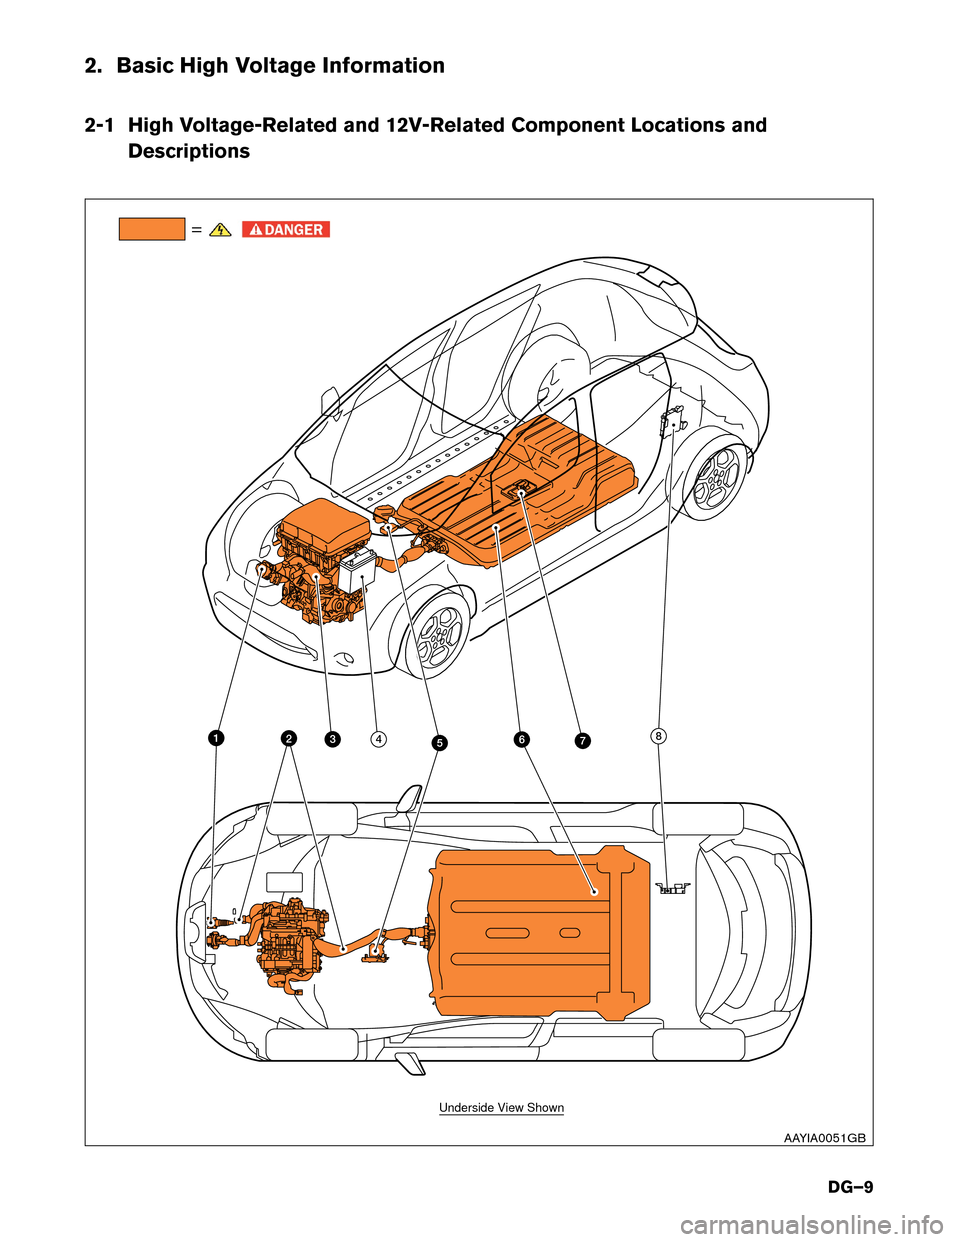 NISSAN LEAF 2014 1.G Dismantling Guide 2. Basic High Voltage Information
2-1
High Voltage-Related and 12V-Related Component Locations and
Descriptions =
76
342 8
5 1
Underside View Shown
AAYIA0051GB
DG–9  